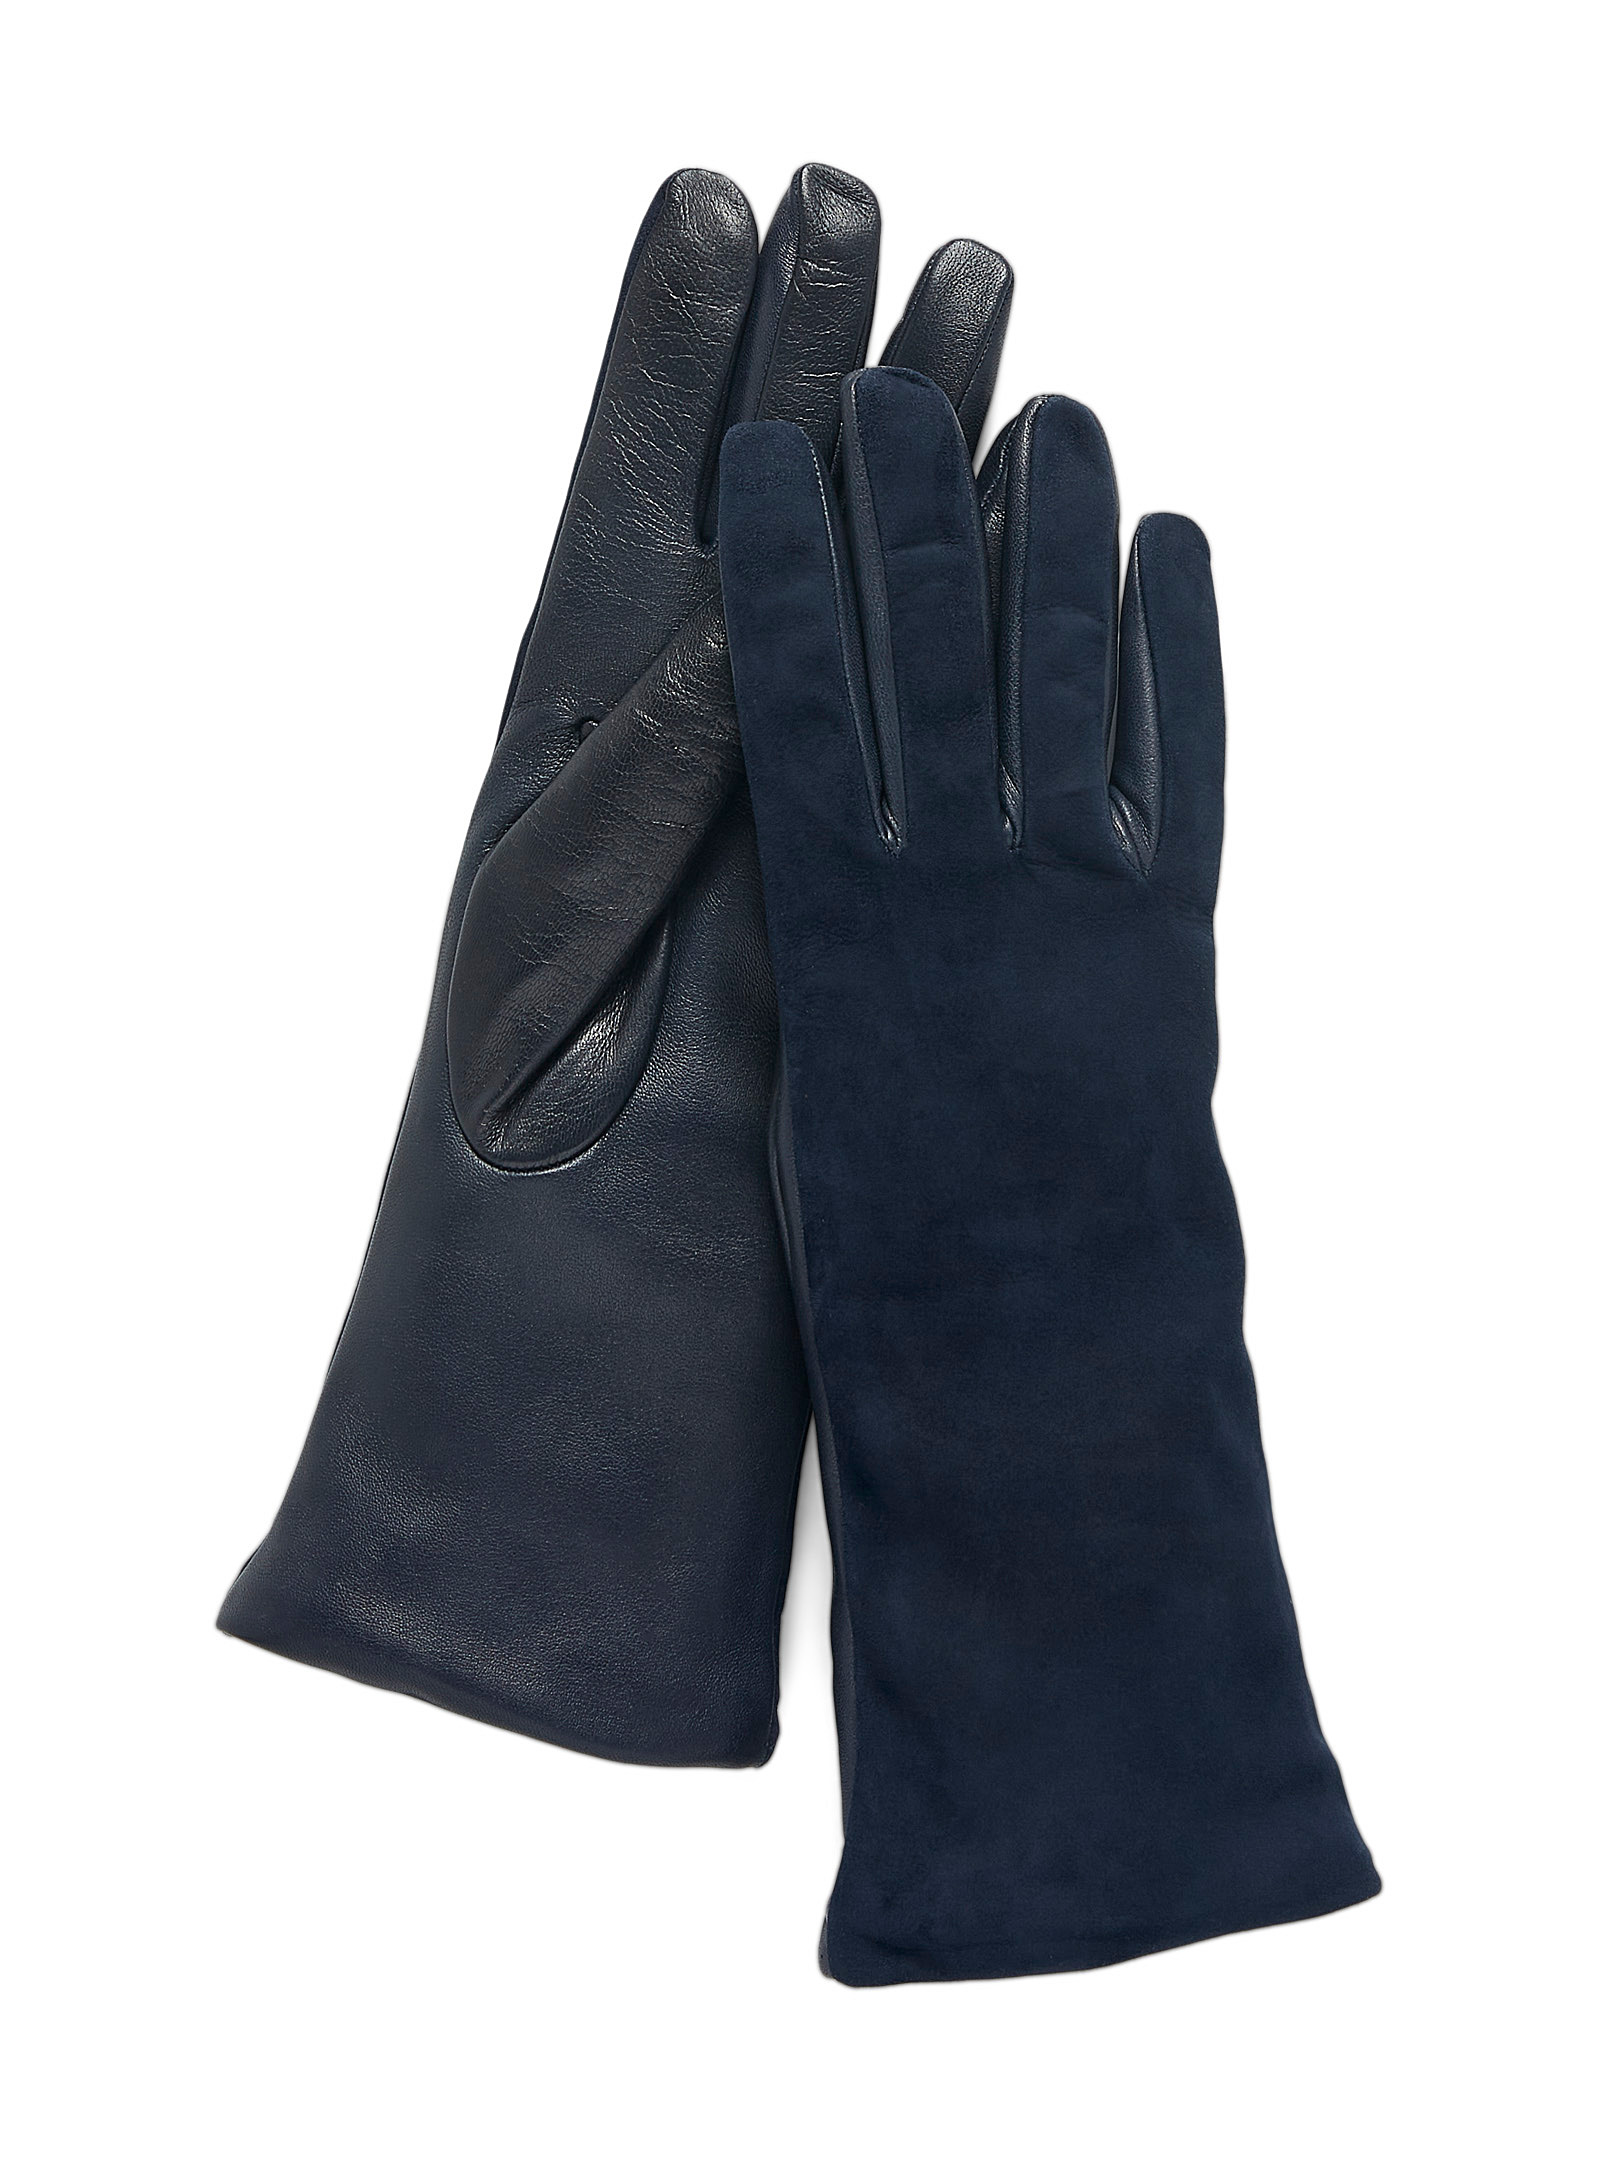 Simons - Women's Suede and leather gloves